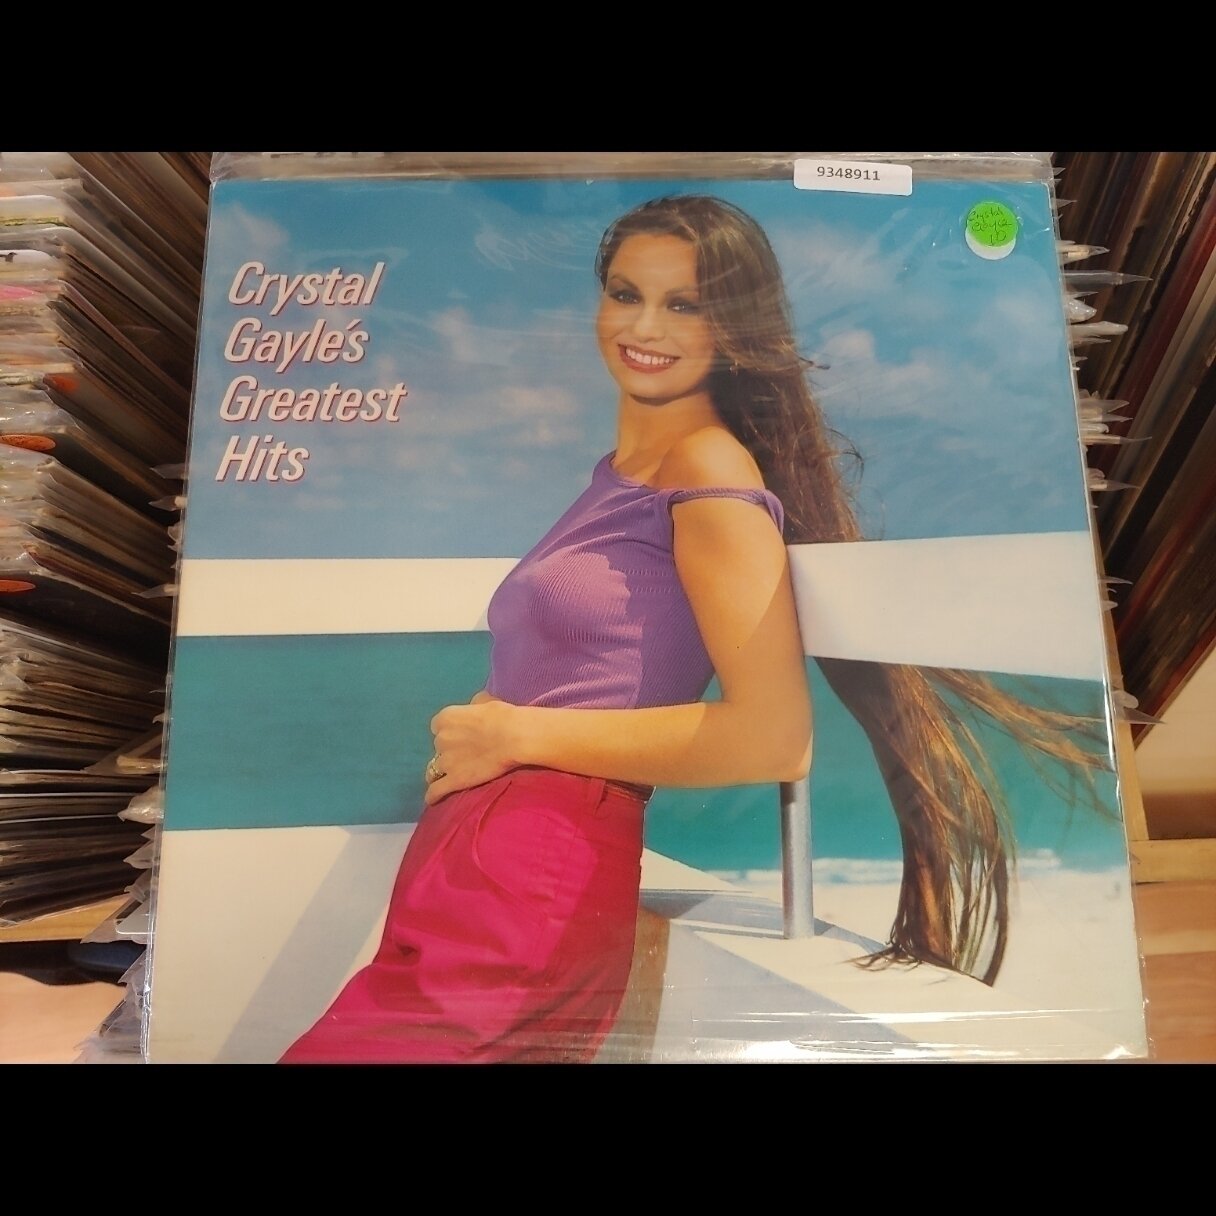 Gayle, Crystal's Greatest Hits